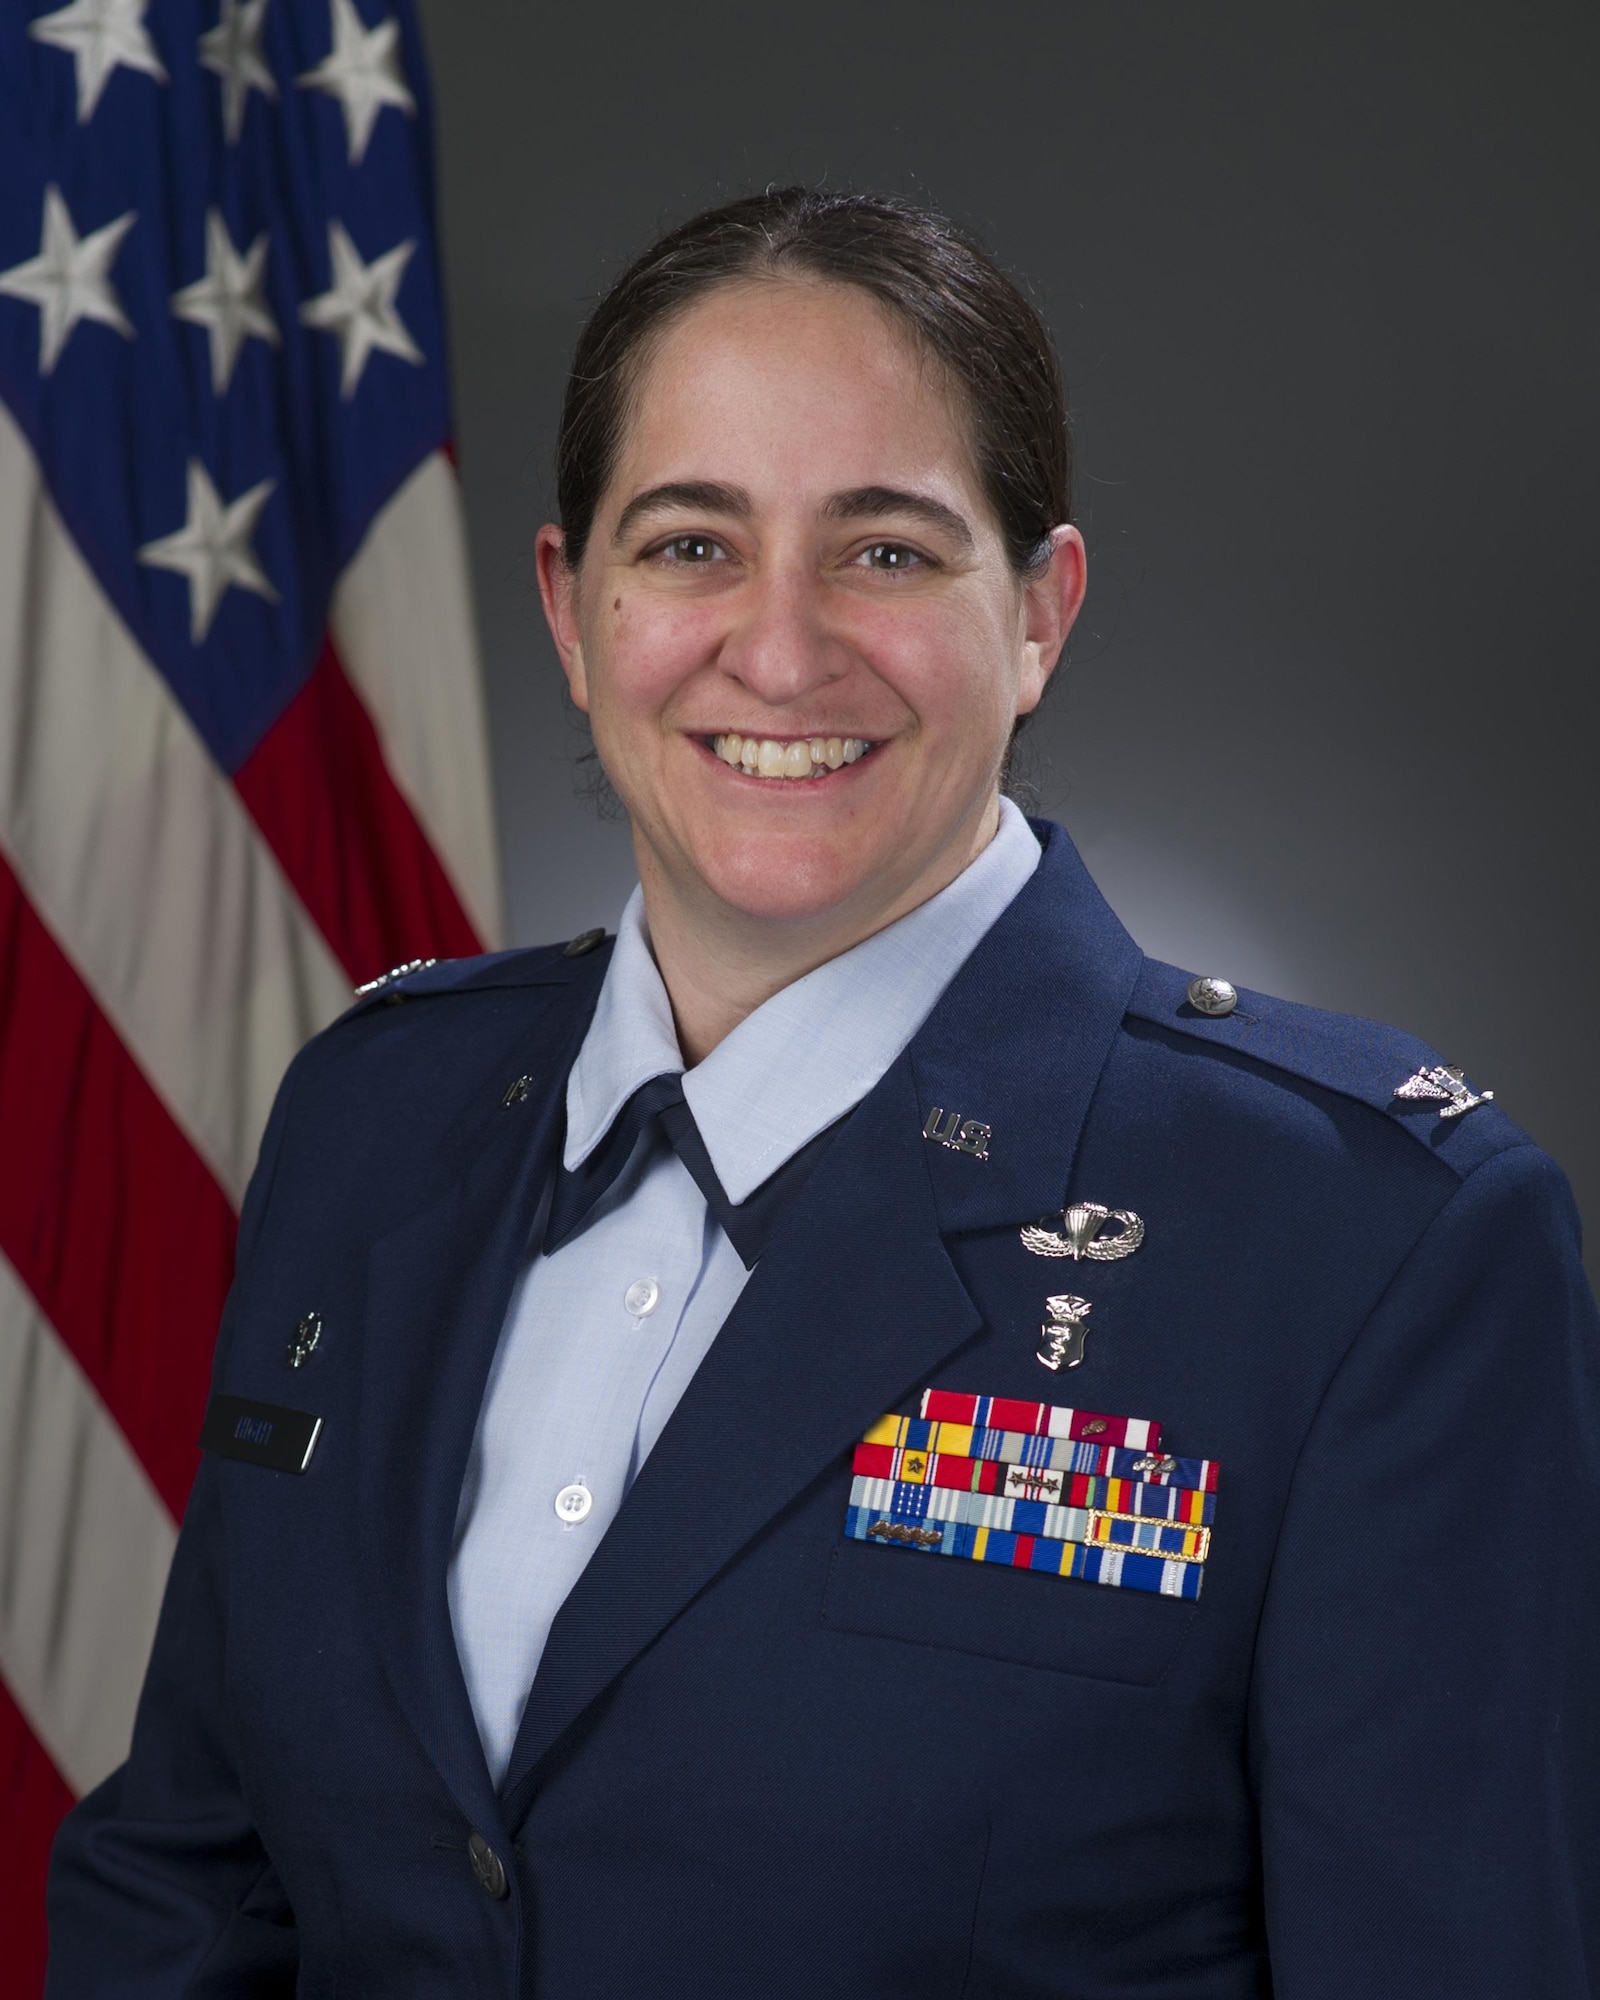 Commentary by Col. Rachel Hight, 60th Surgical Operations Squadron Commander